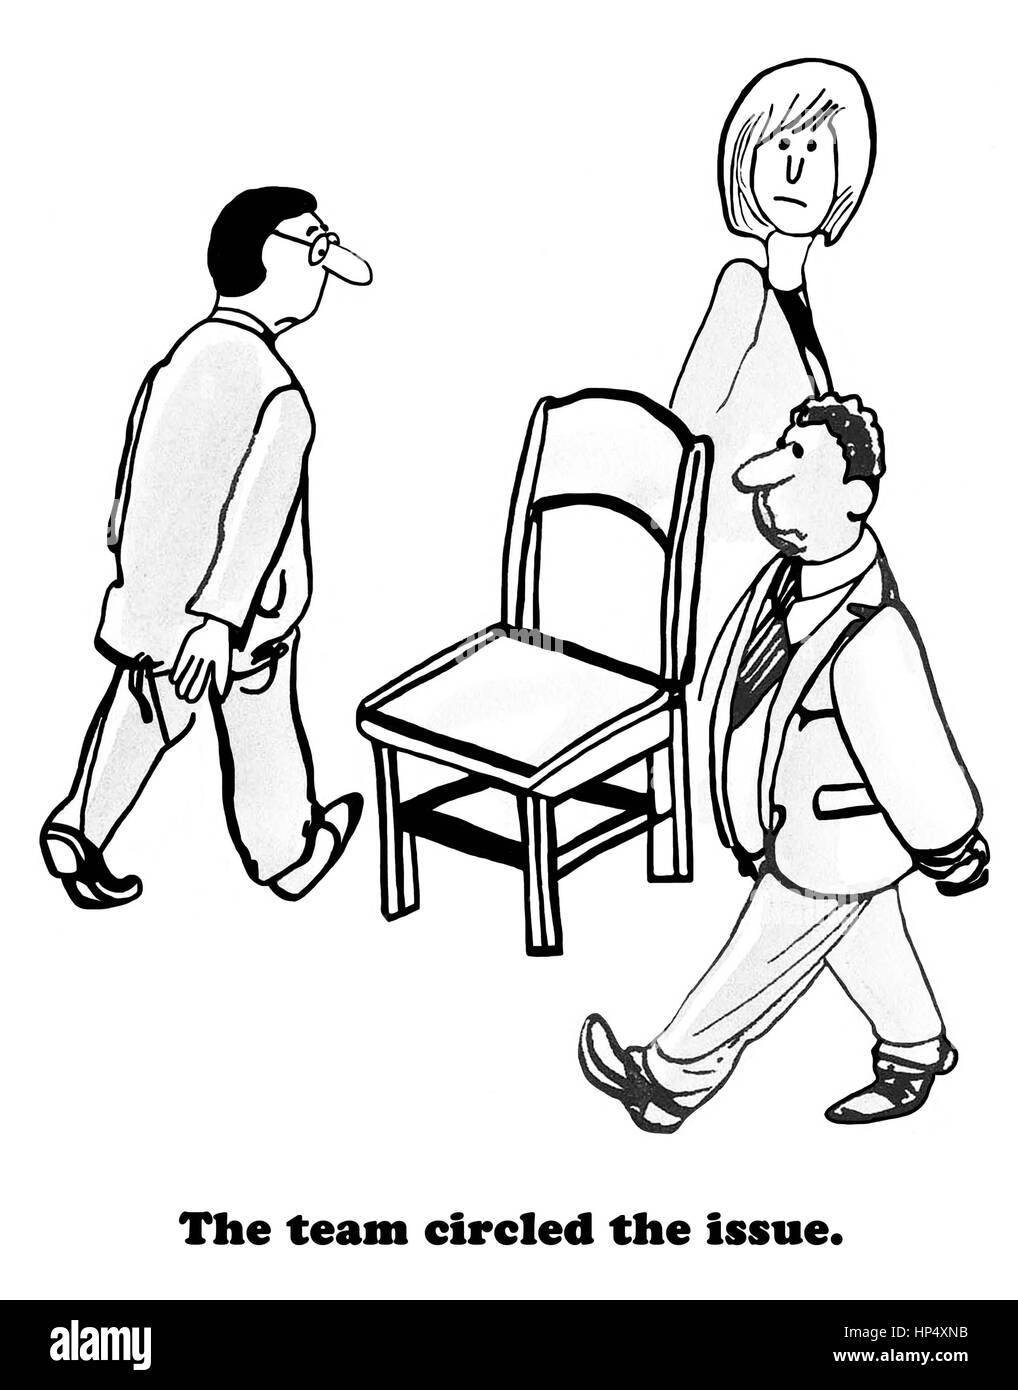 Business cartoon of a team of people circling a chair. Stock Photo